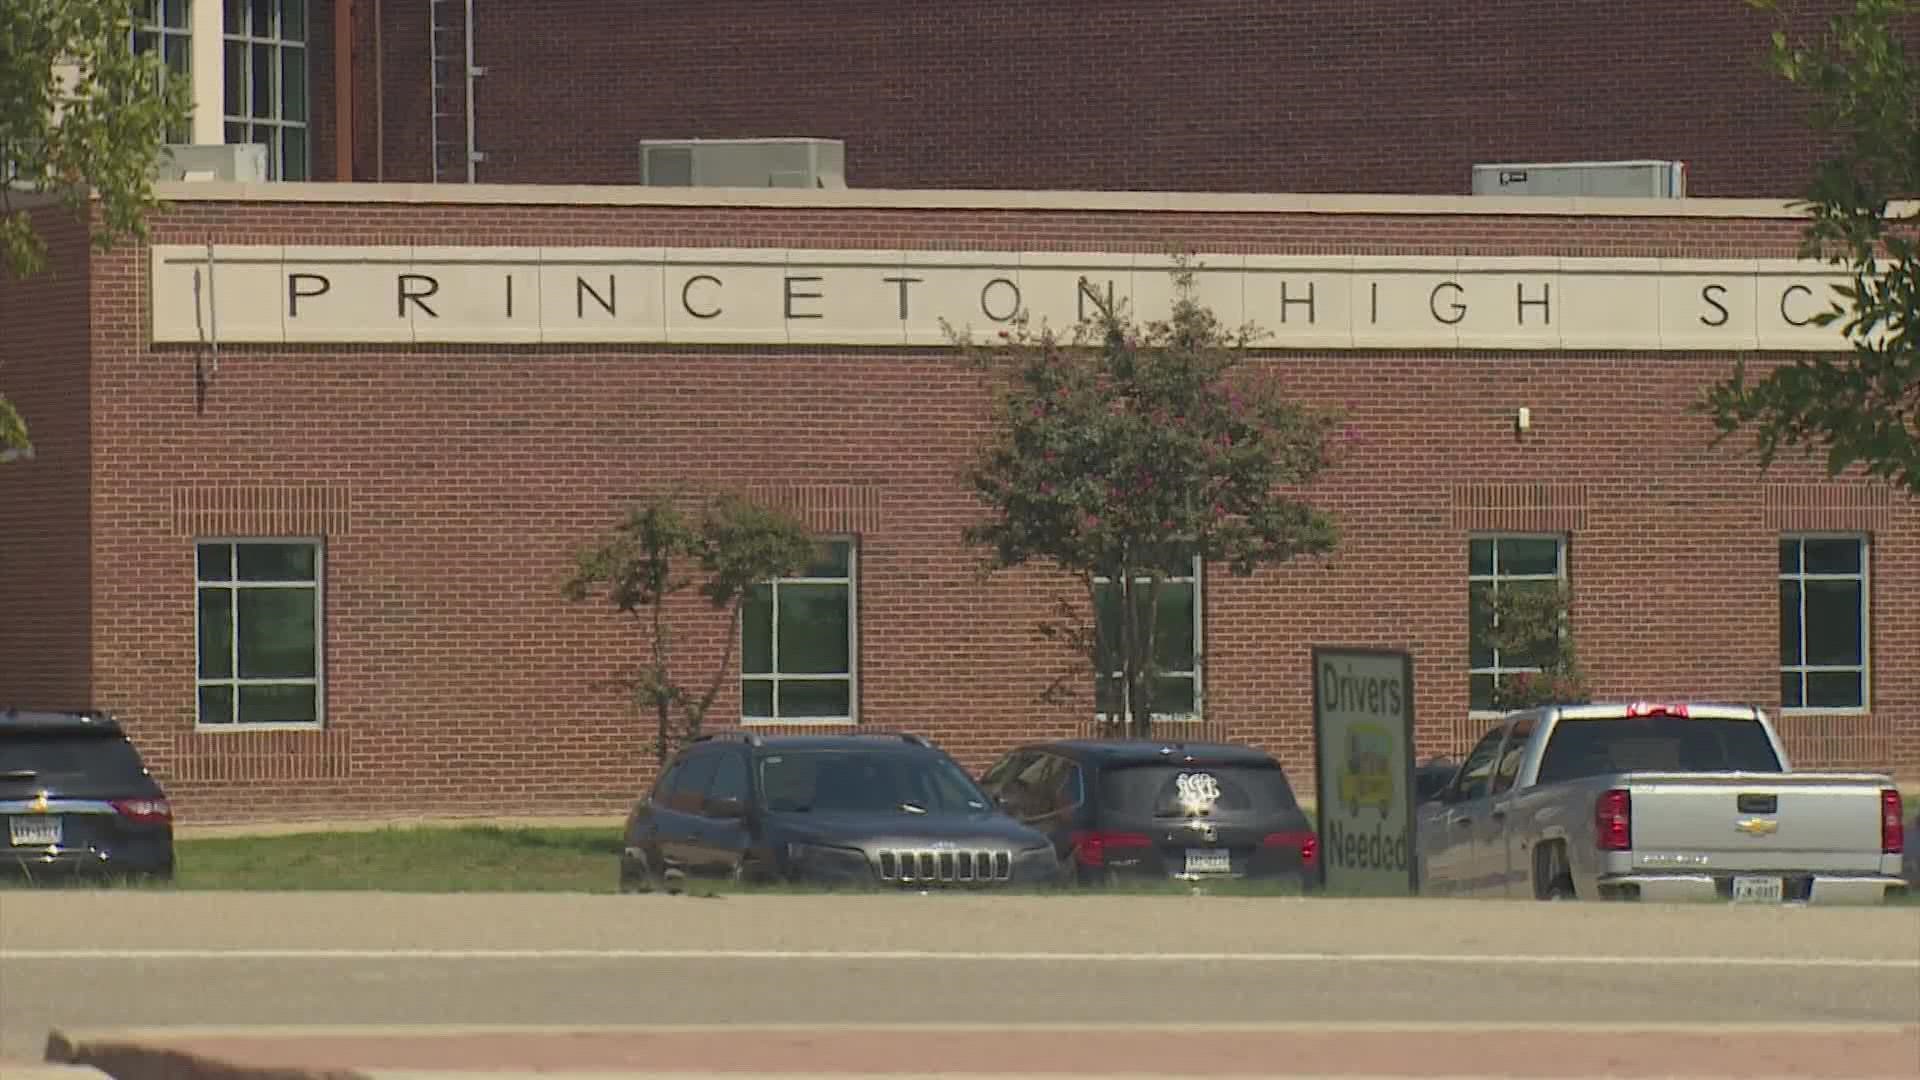 Police in Princeton said they responded to the Lovelady High School homecoming dance on Saturday night.